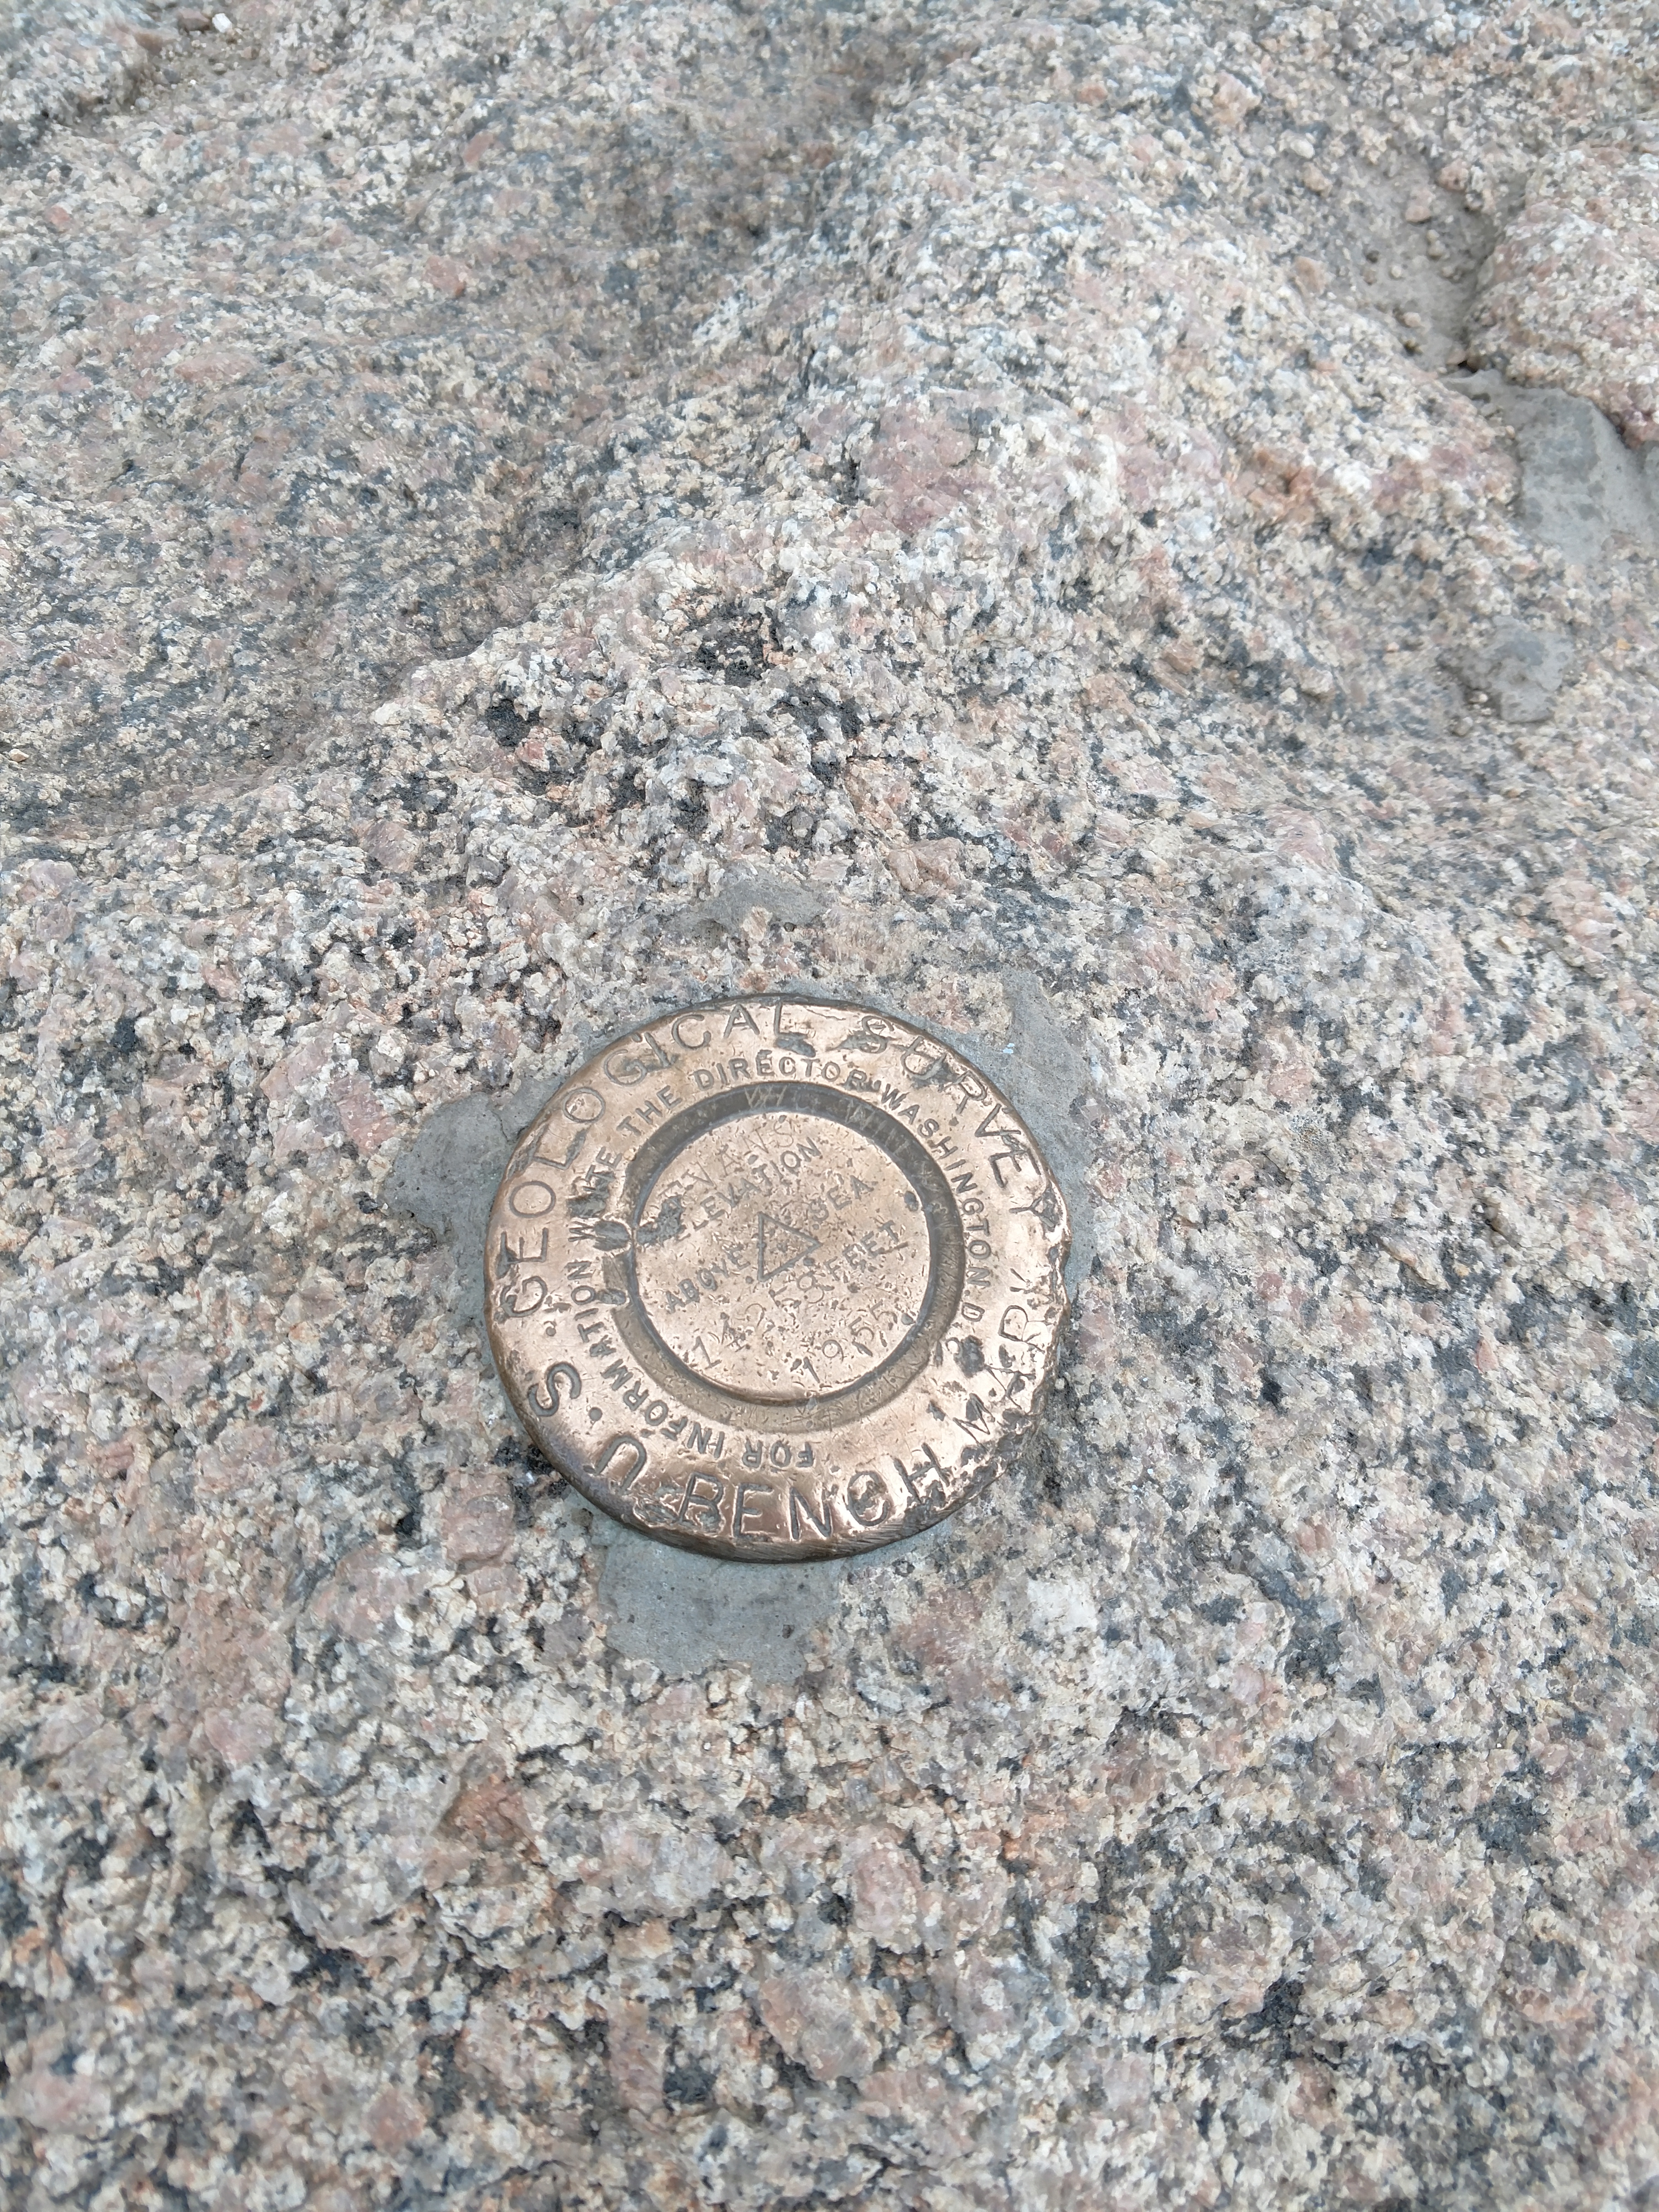 A USGS benchmark at the Summit of Mount Evans in the Mount Evans Wilderness.